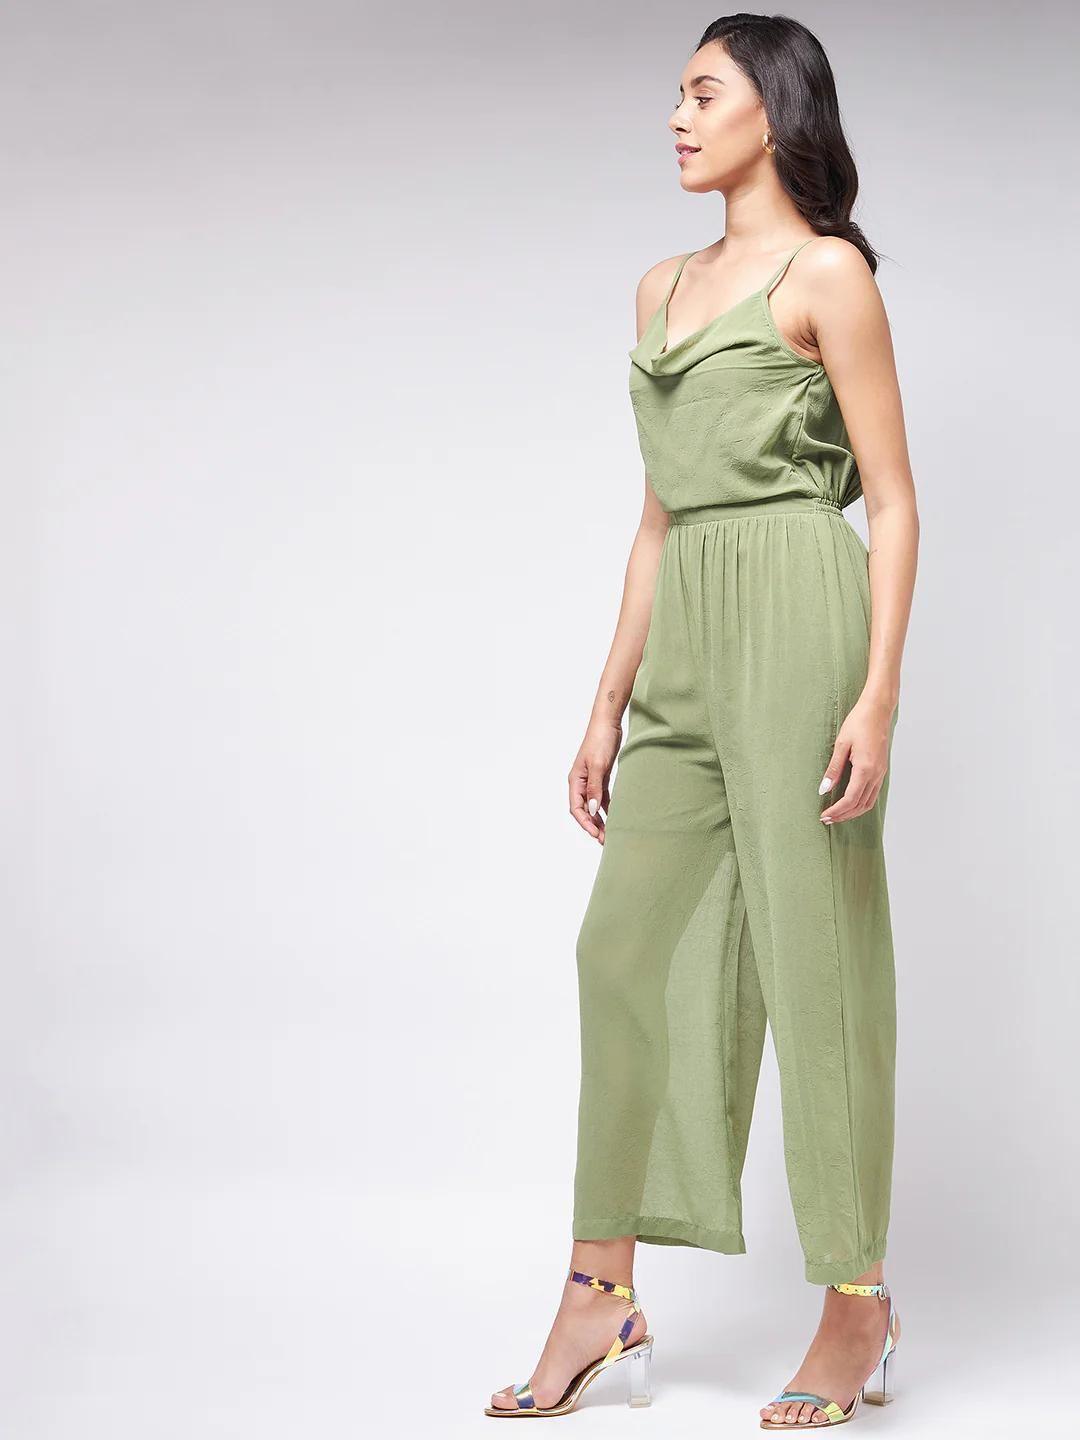 PANNKH Flaunt Yourself With Solid Green Cowl Neckline Jumpsuit - Super Kart